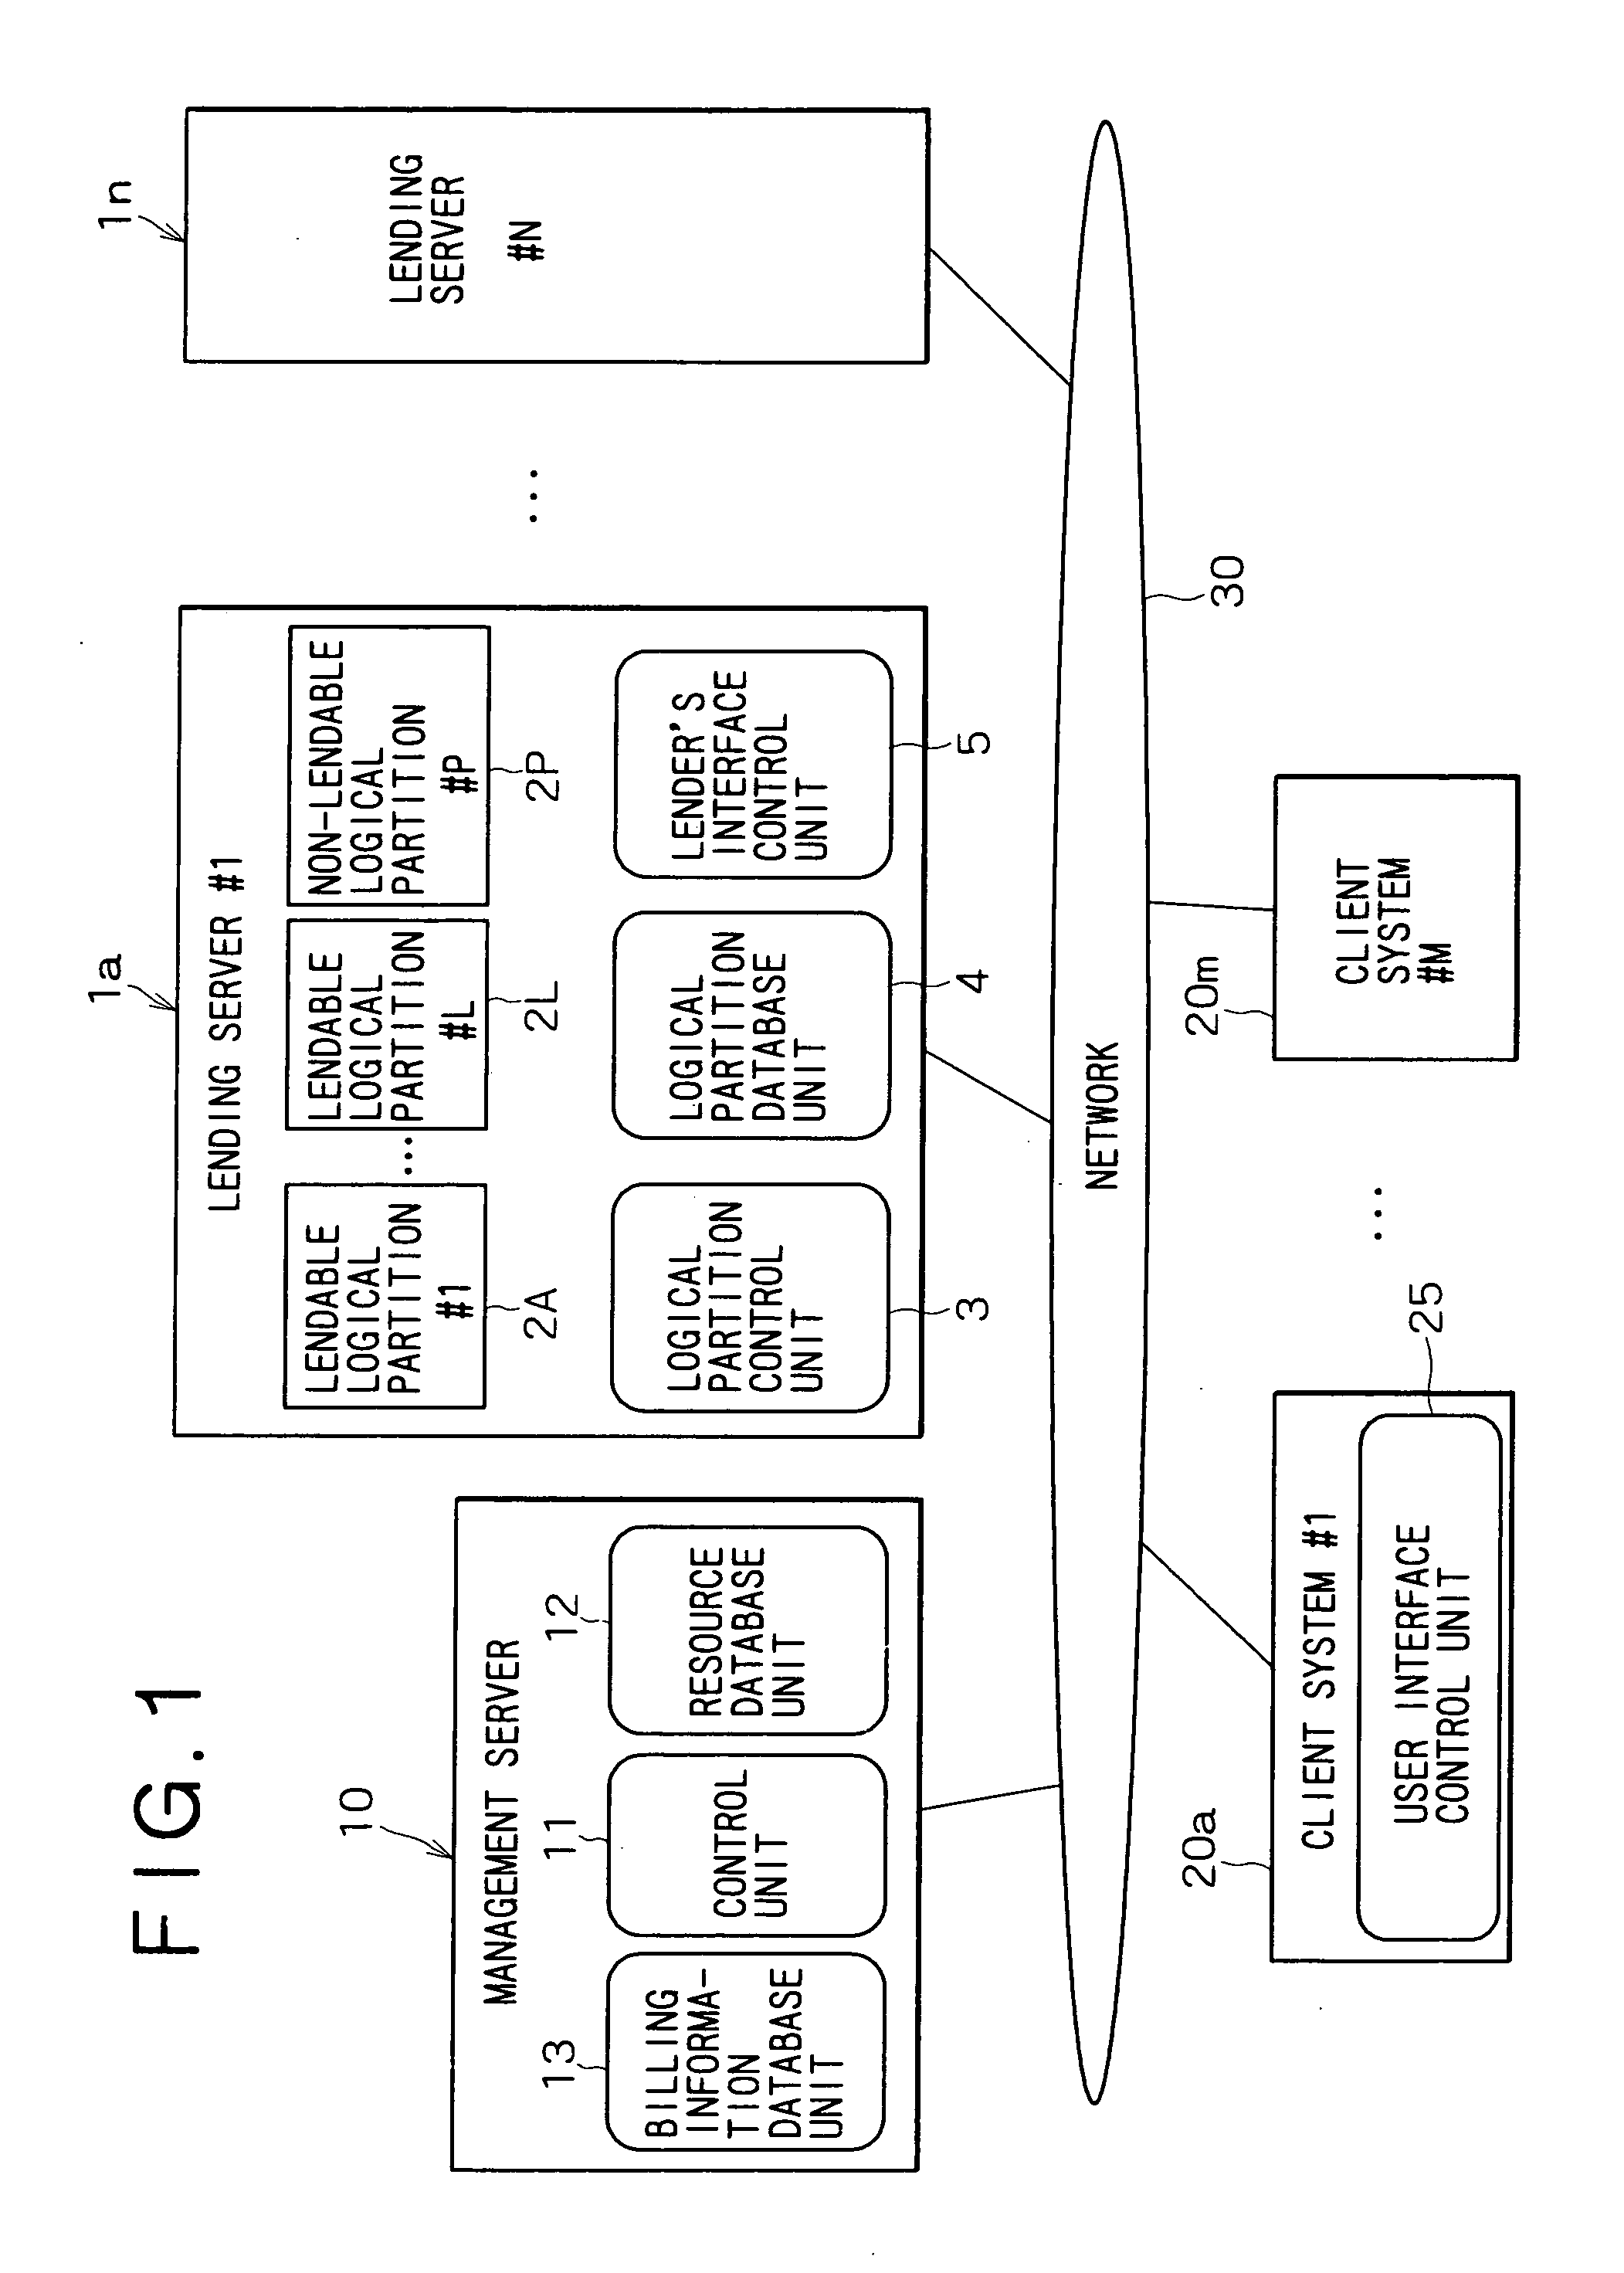 System and method for computer resource marketing